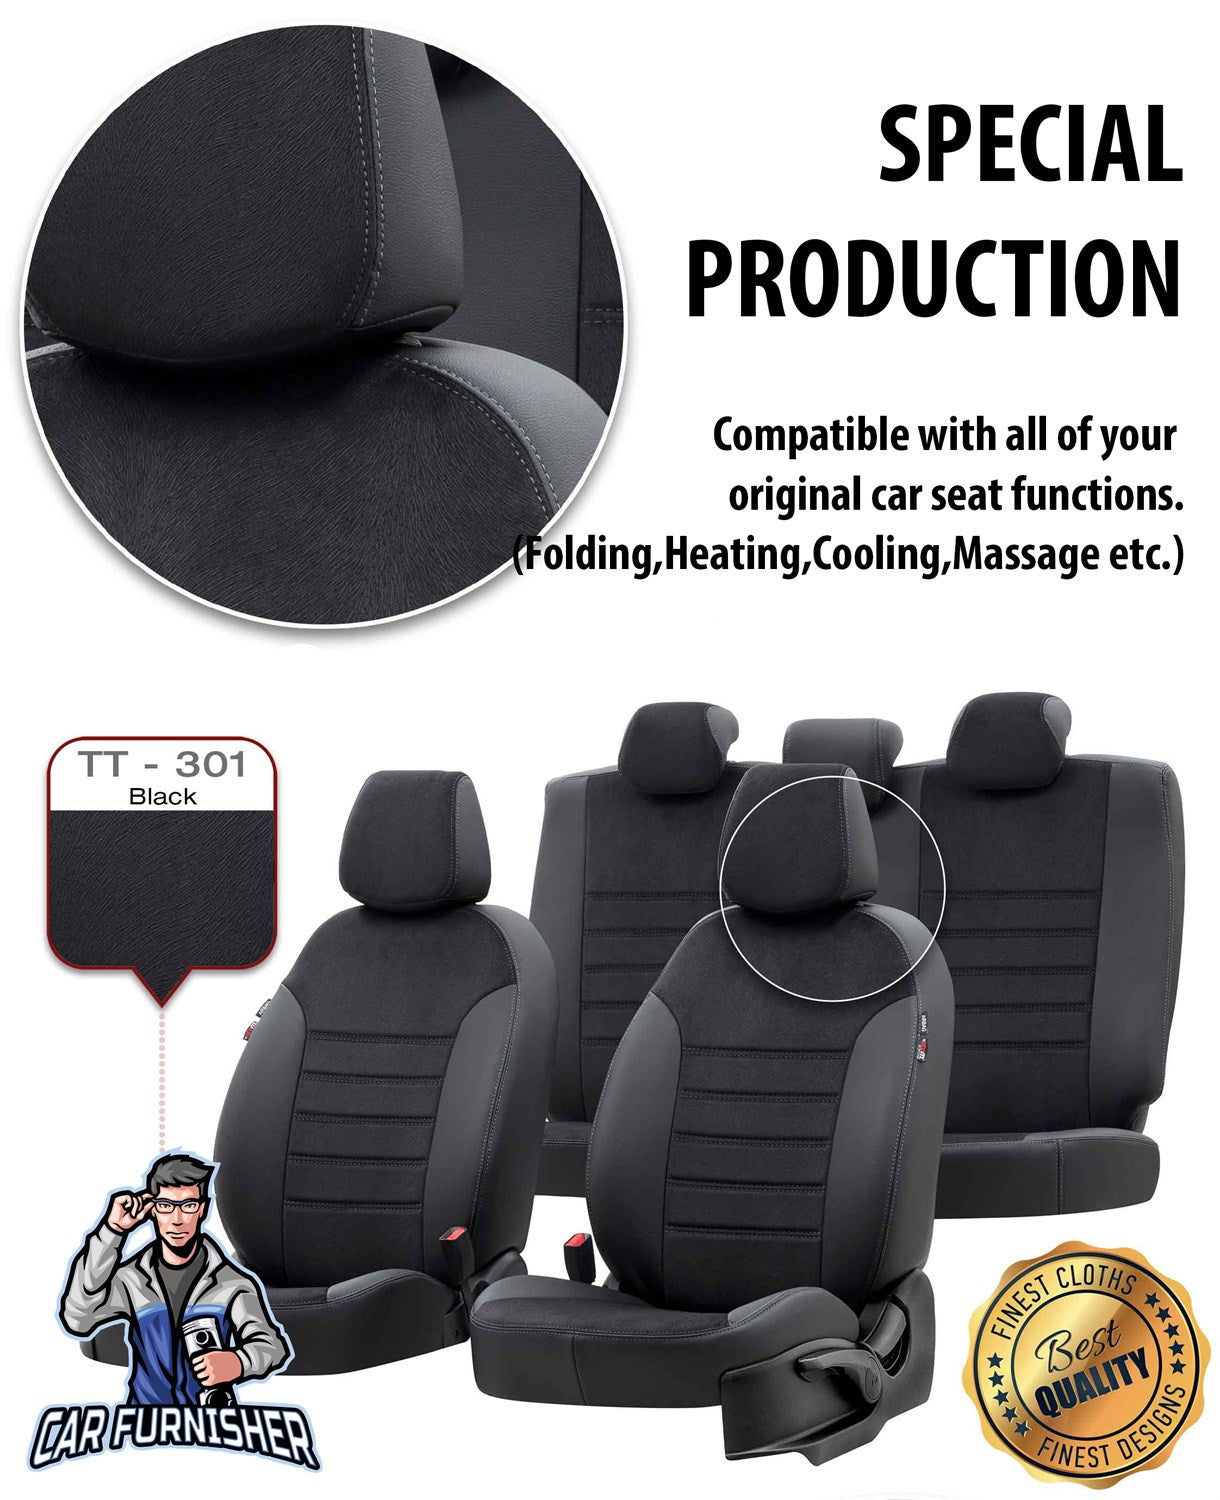 Renault Modus Car Seat Covers 2004-2008 London Design Smoked Full Set (5 Seats + Handrest) Leather & Fabric